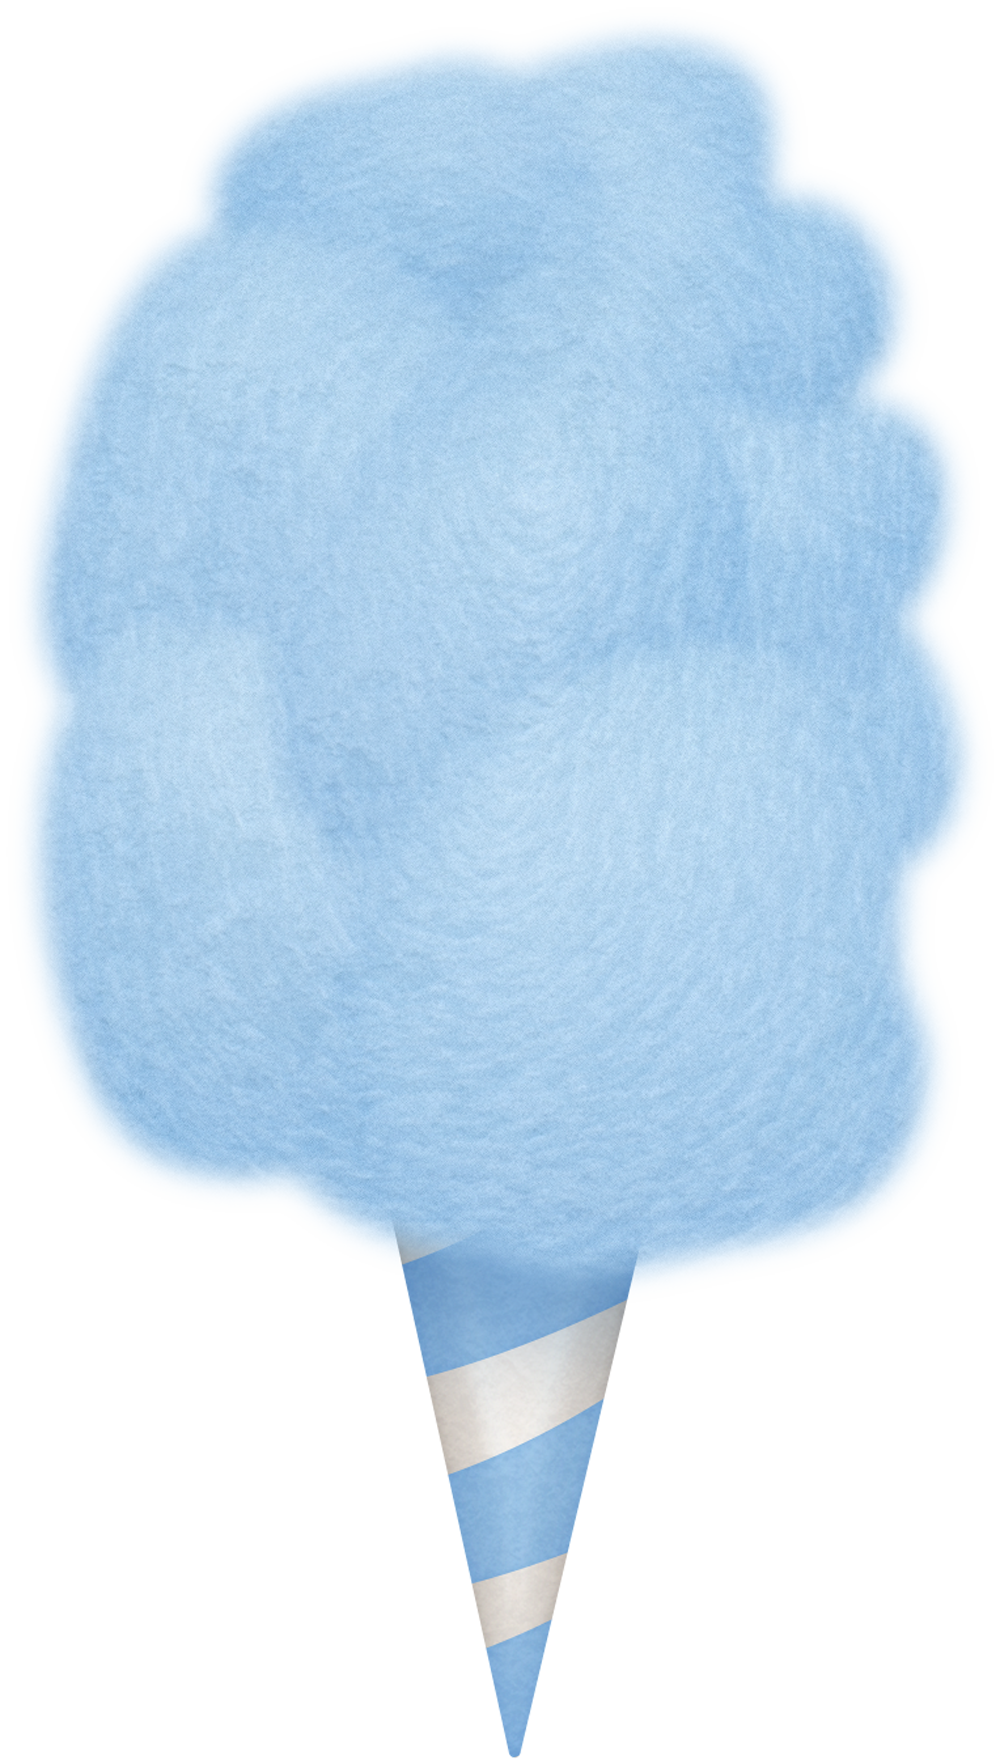 Cotton Candy Transparent Png Candy Floss Images Free Download Free Transparent Png Logos - cotton candy feed your pets roblox wiki fandom powered